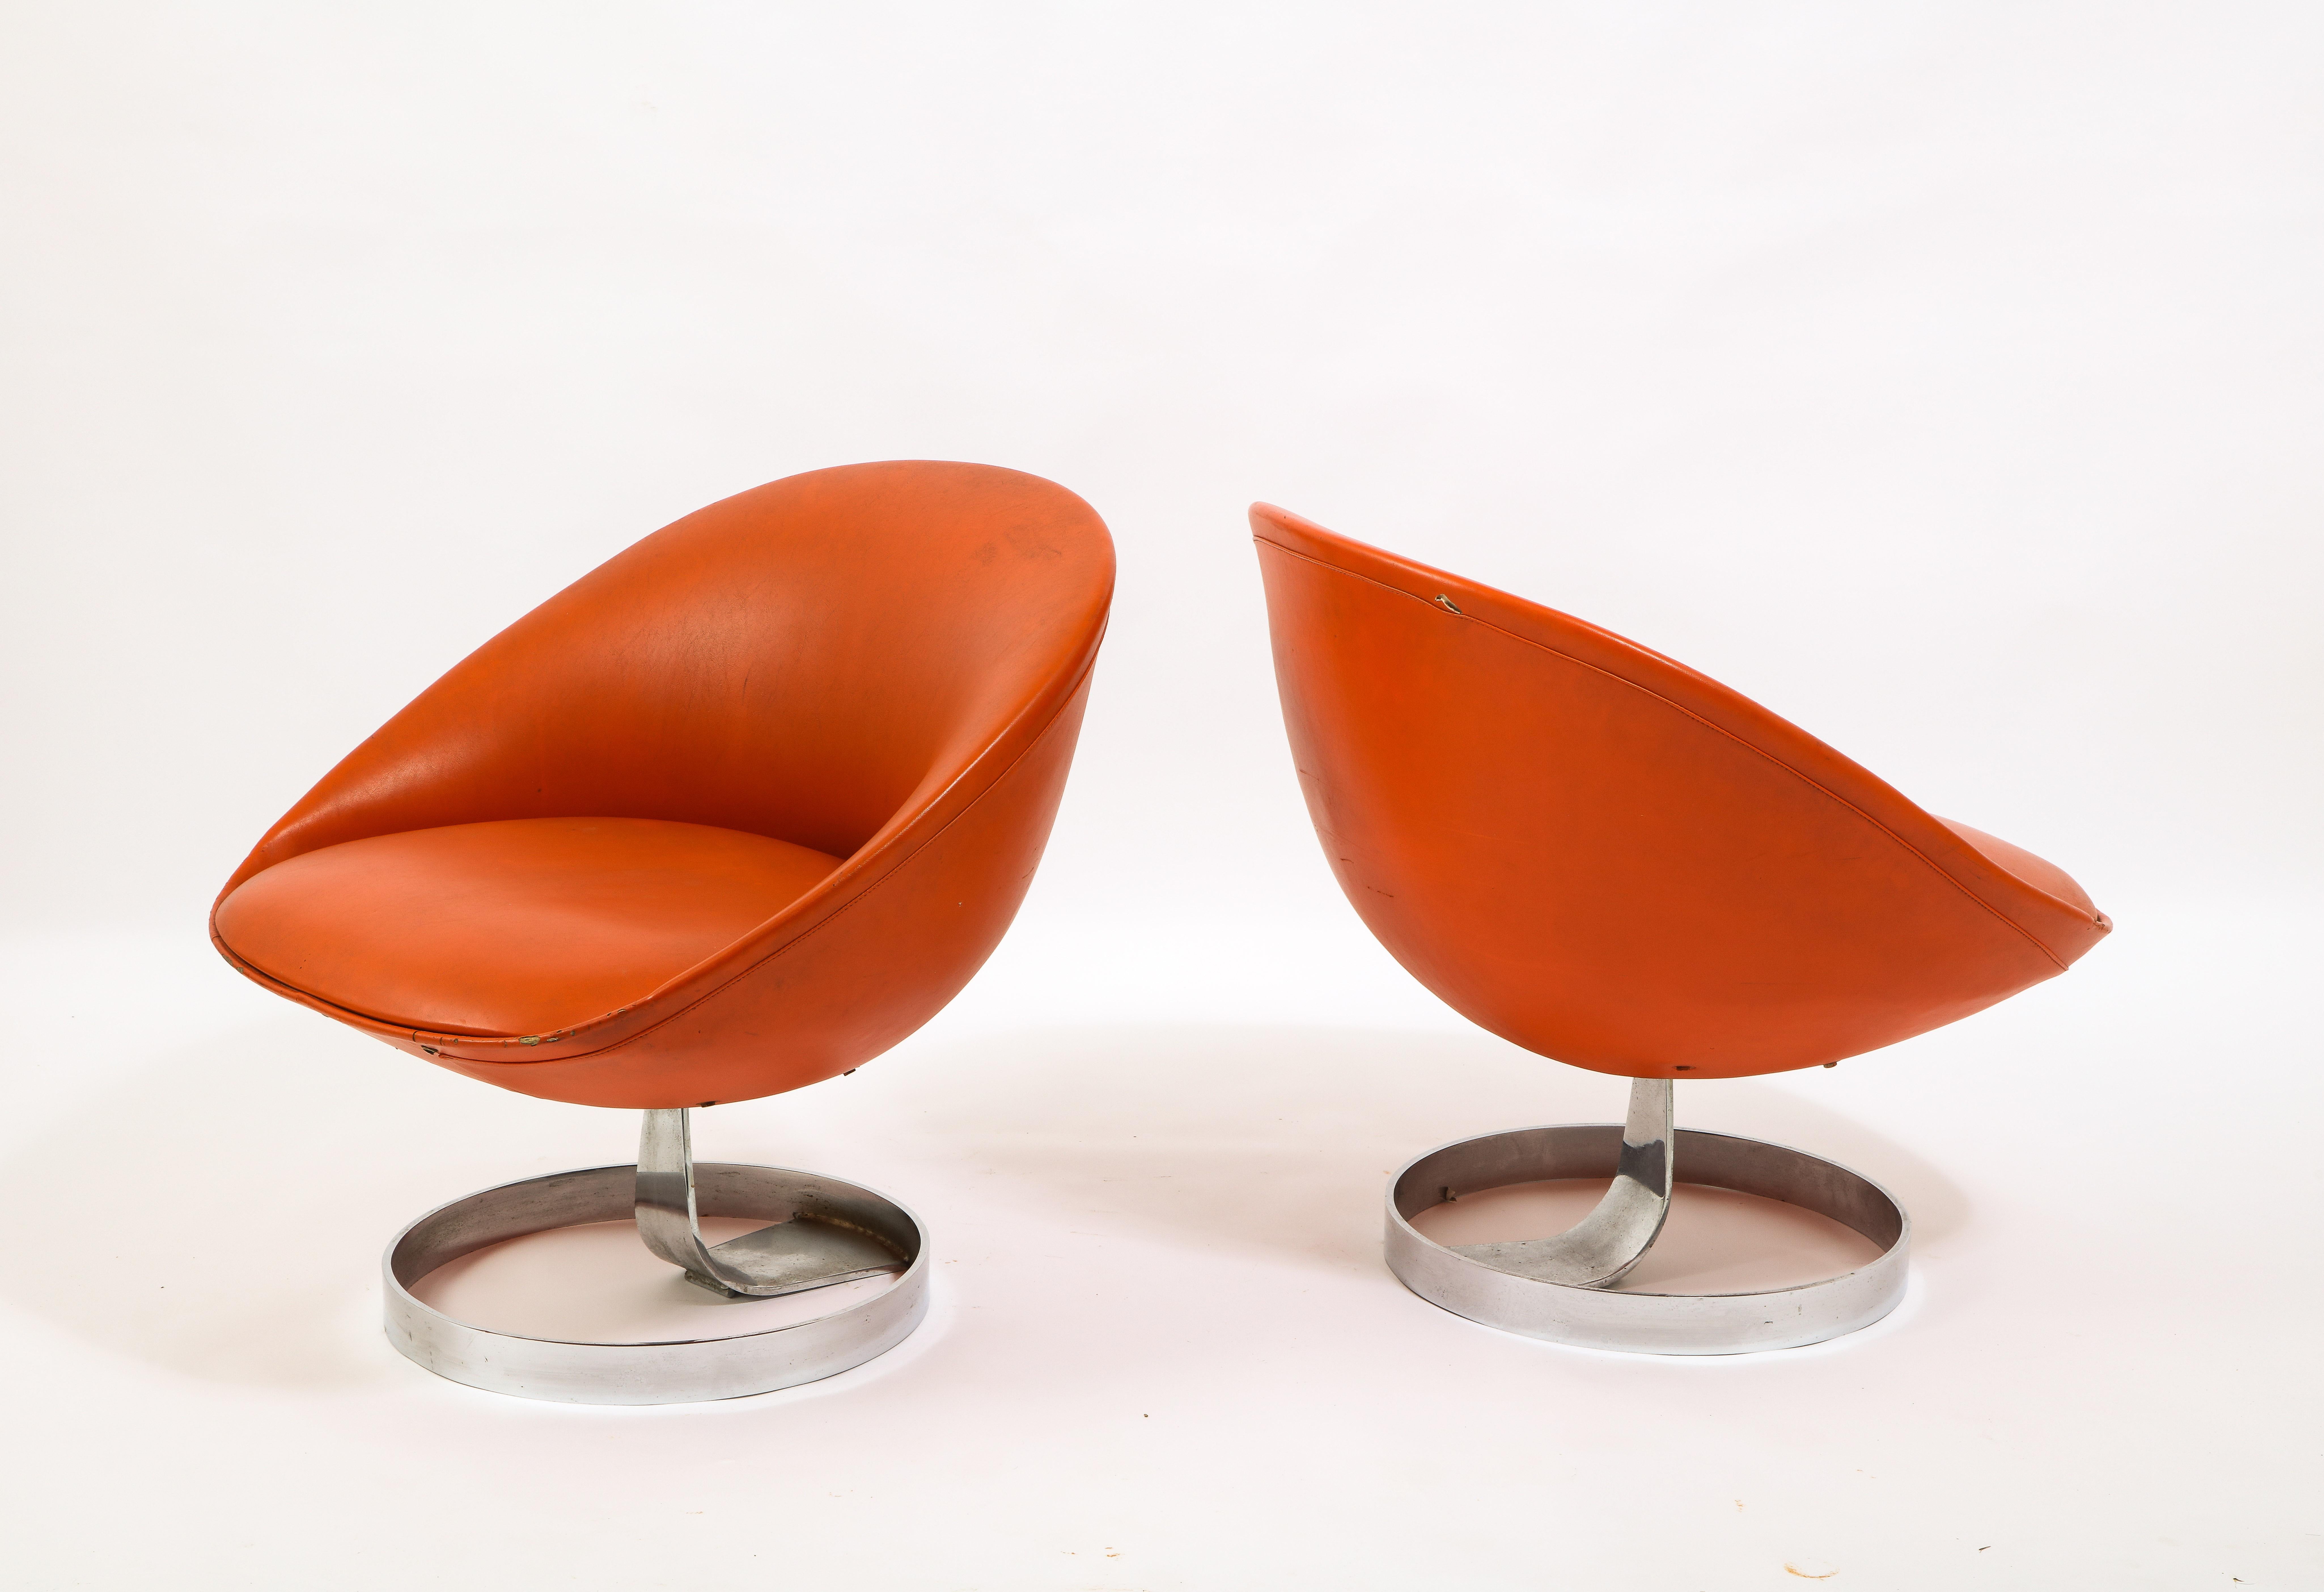 Rare pair of K1 lounge chairs for Alpha Industries. Maurice Calka is well known for his outlandish fiberglass boomerang desks, but this pair of chairs is a perfect example of his creativity. The shell is formed aluminum resting on a chrome-plated